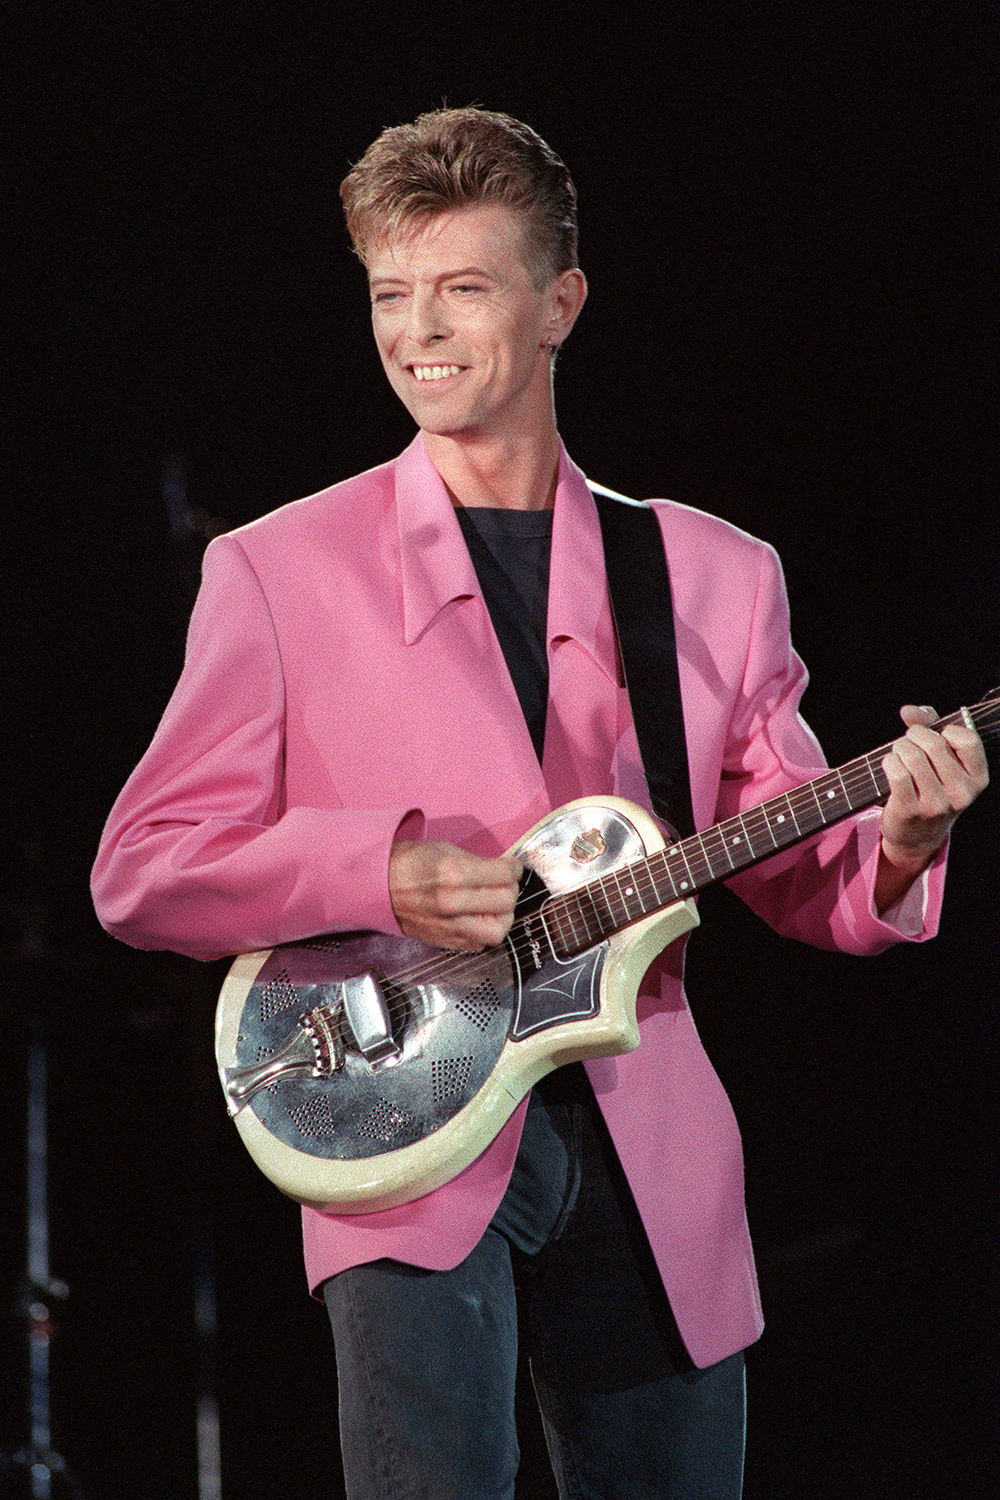 David Bowie performs on stage during a concert organized by NRJ radio station at place de la Nation in Paris in 1991.